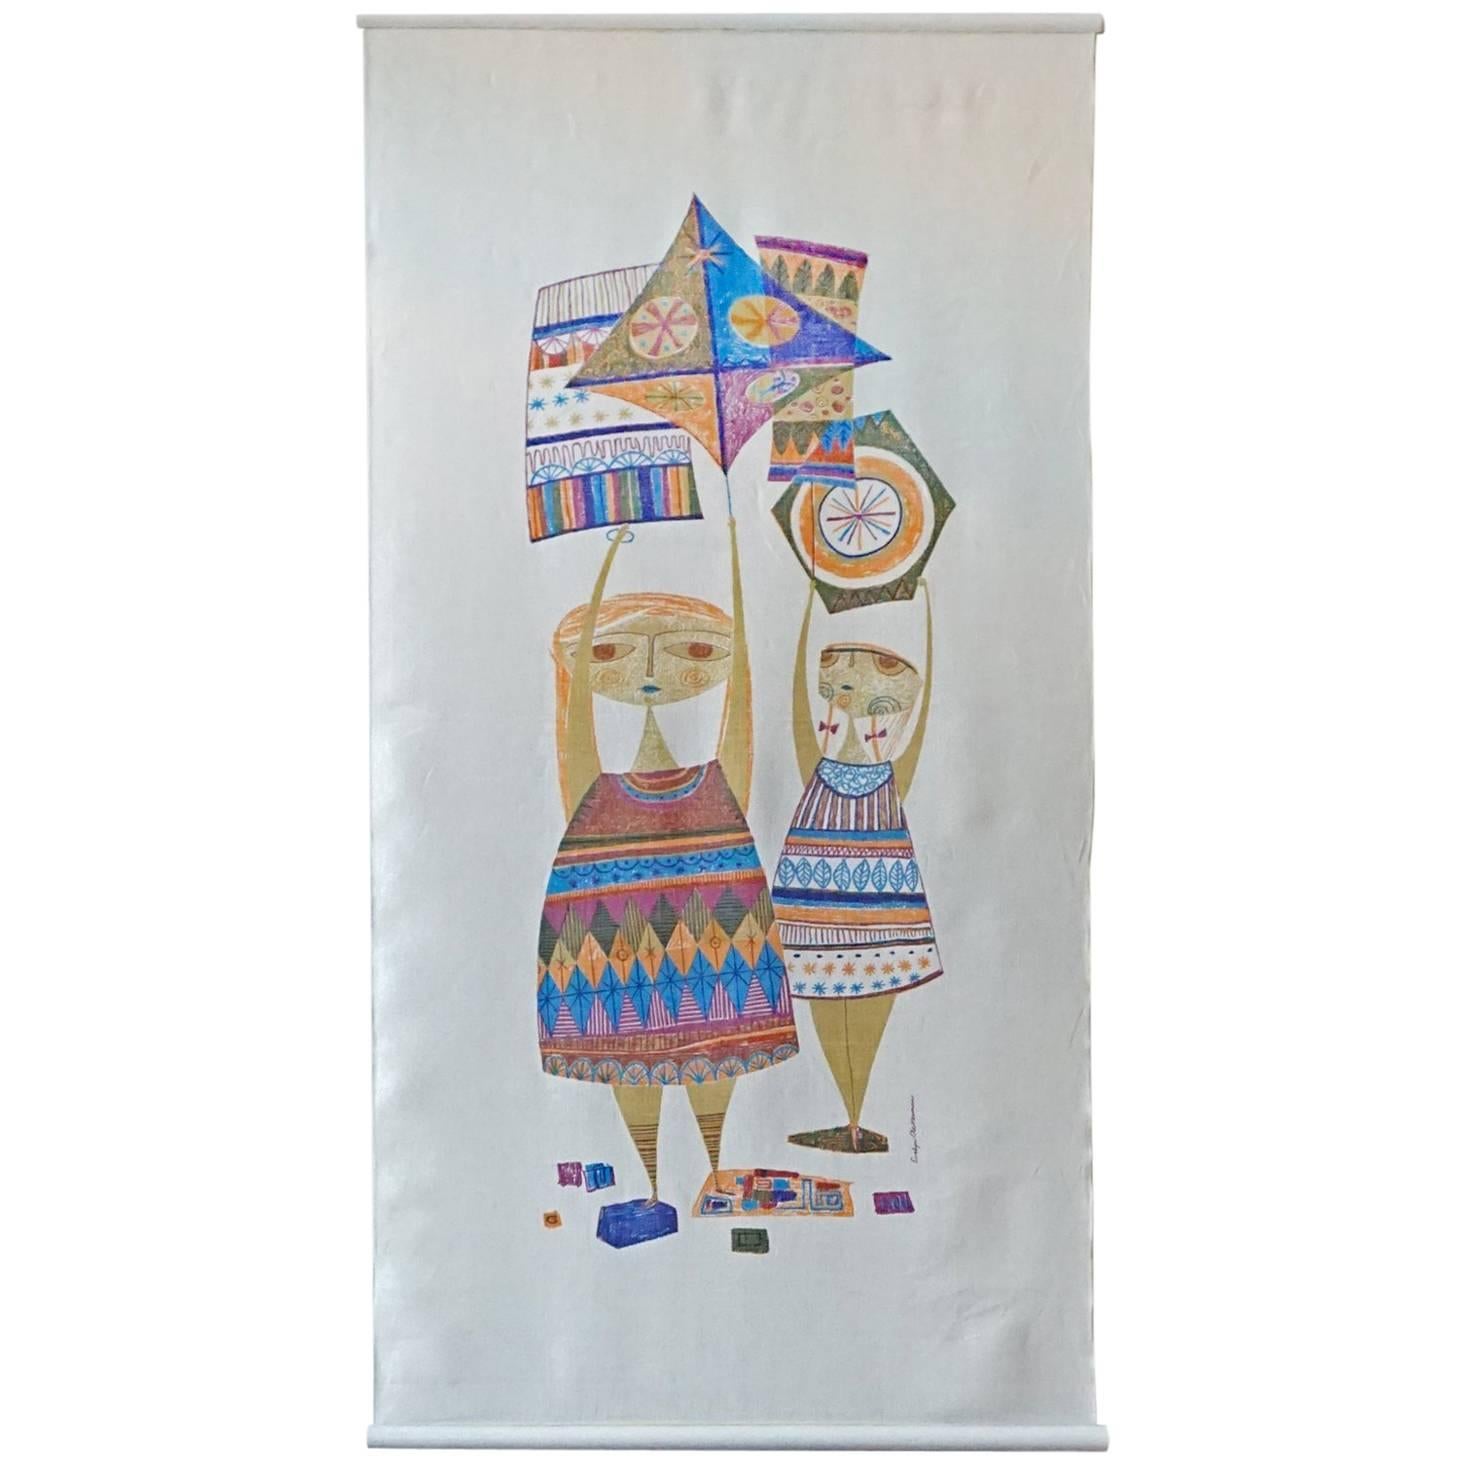 Kites Wall Hanging by Evelyn and Jerome Ackerman, 1958